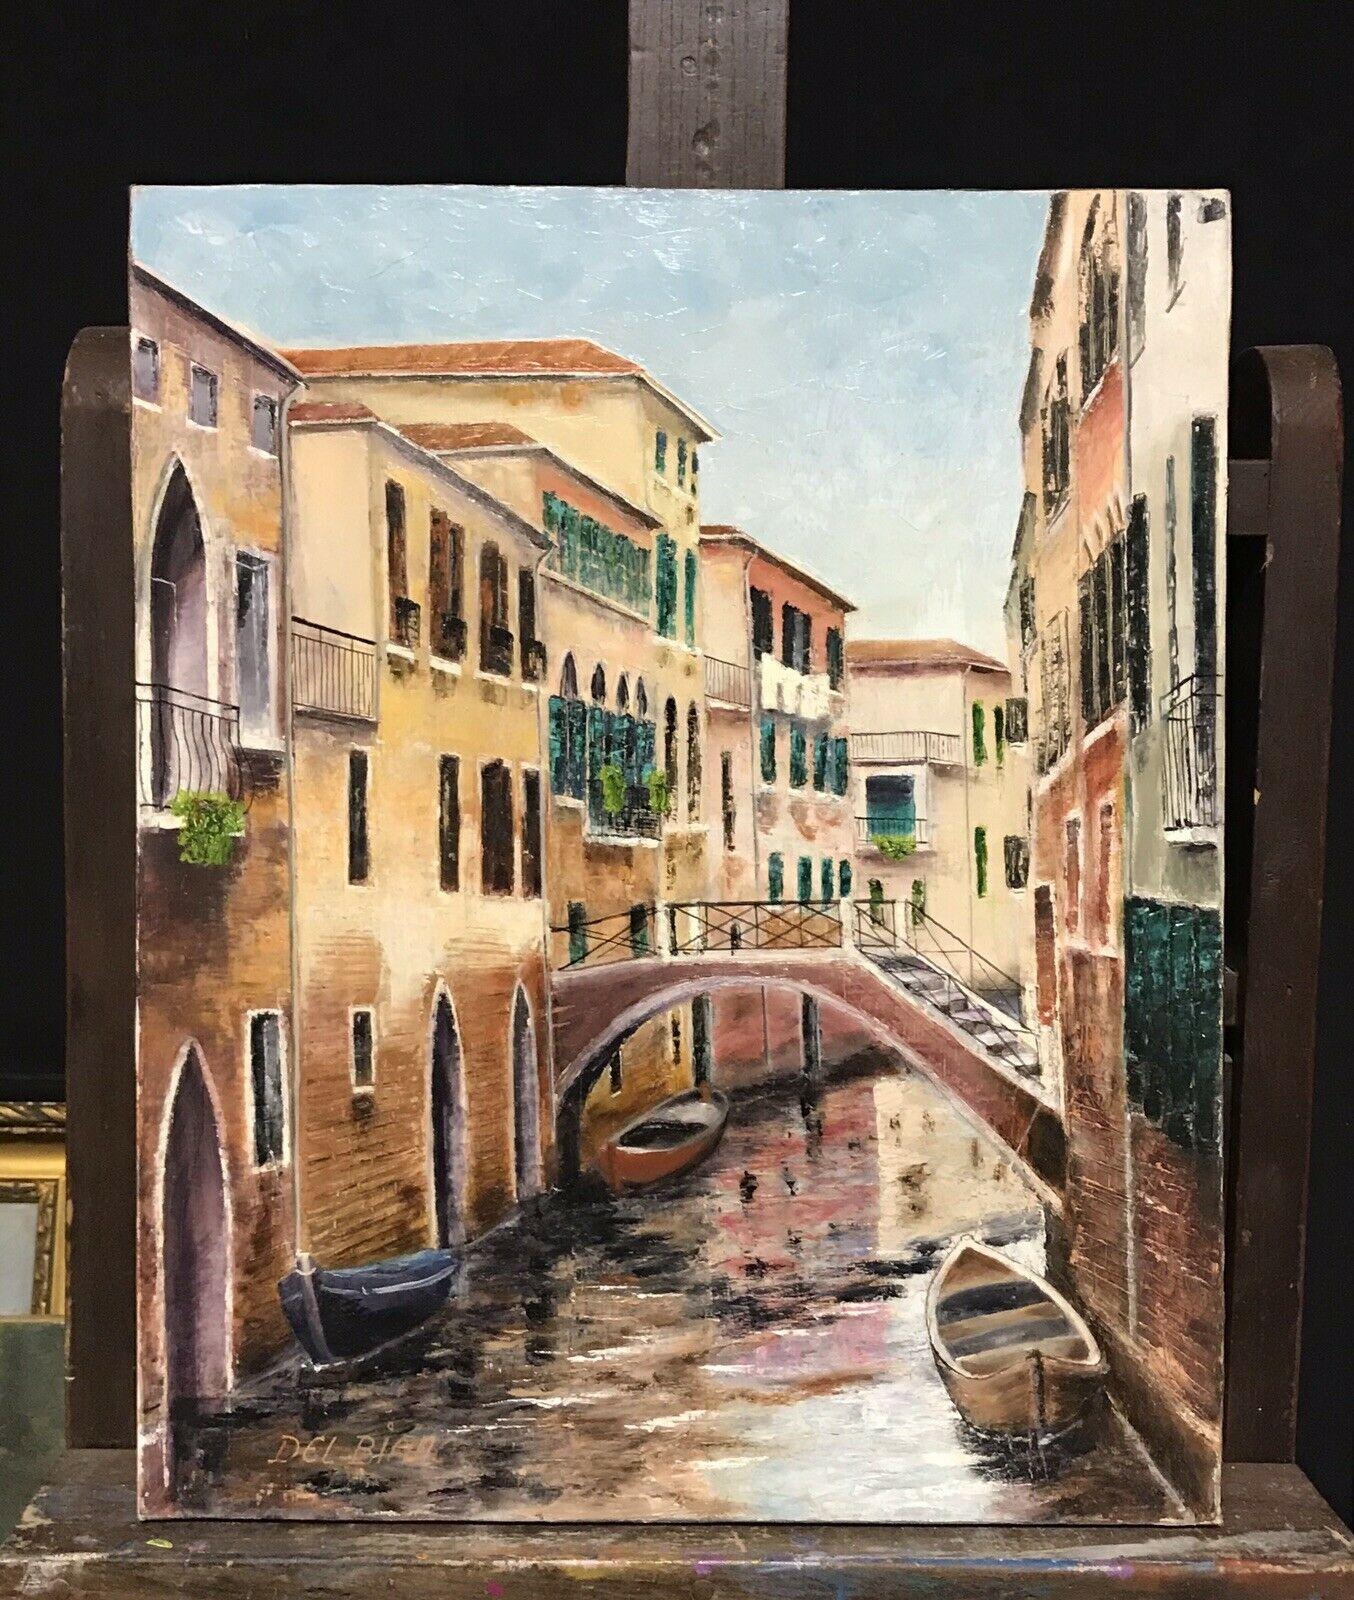 LARGE SIGNED OIL PAINTING - TRANQUIL VENICE CANAL BACKWATER - Painting by LOUIS DEL BIANCO (B.1925